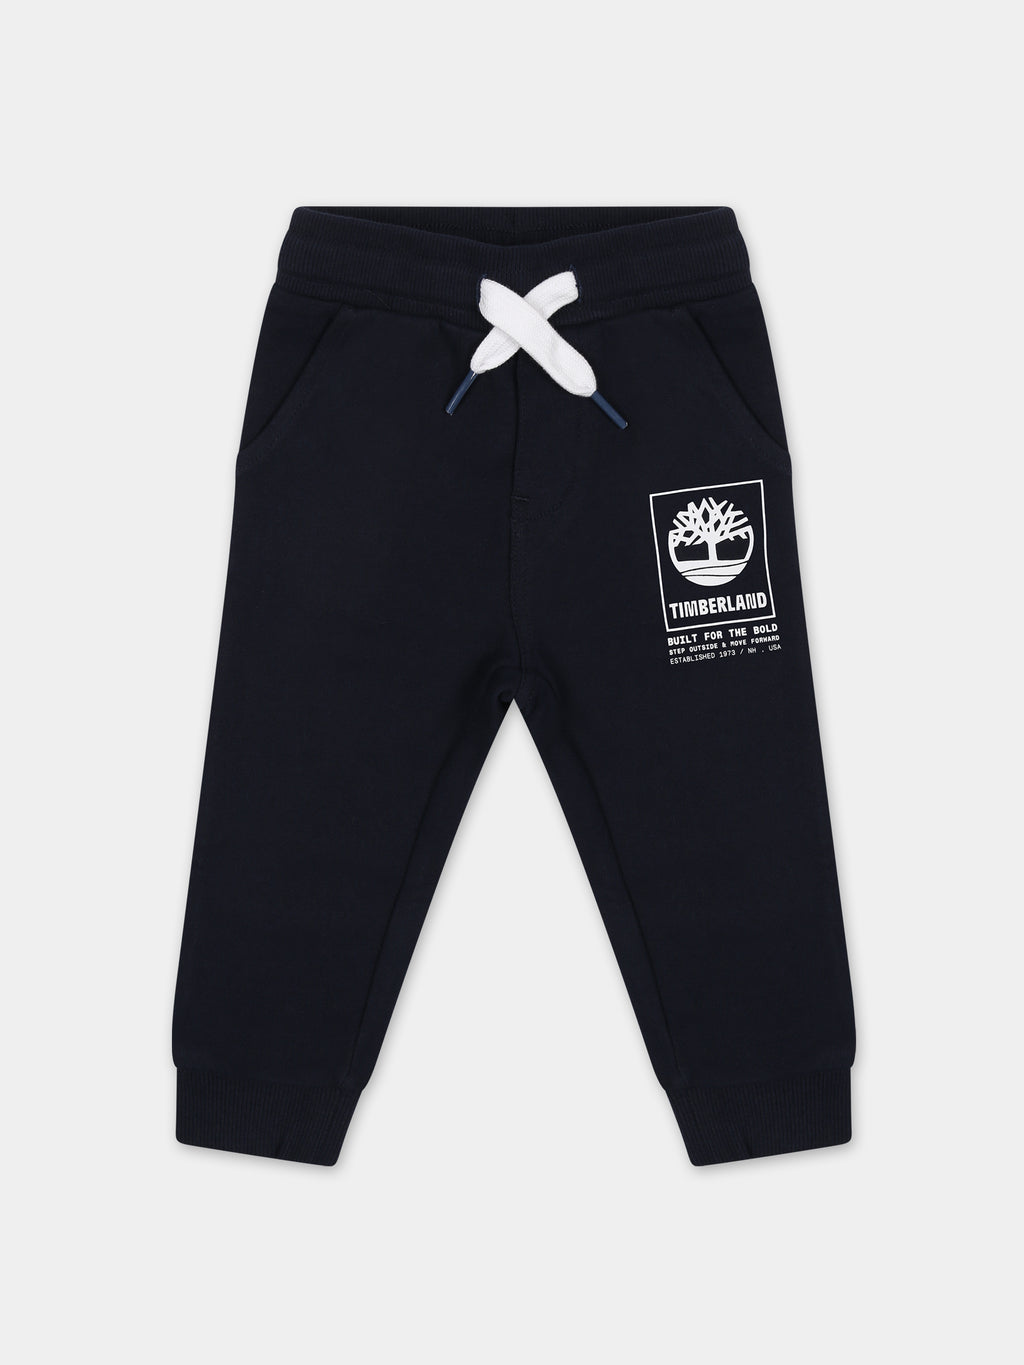 Blue trousers for baby boy with logo